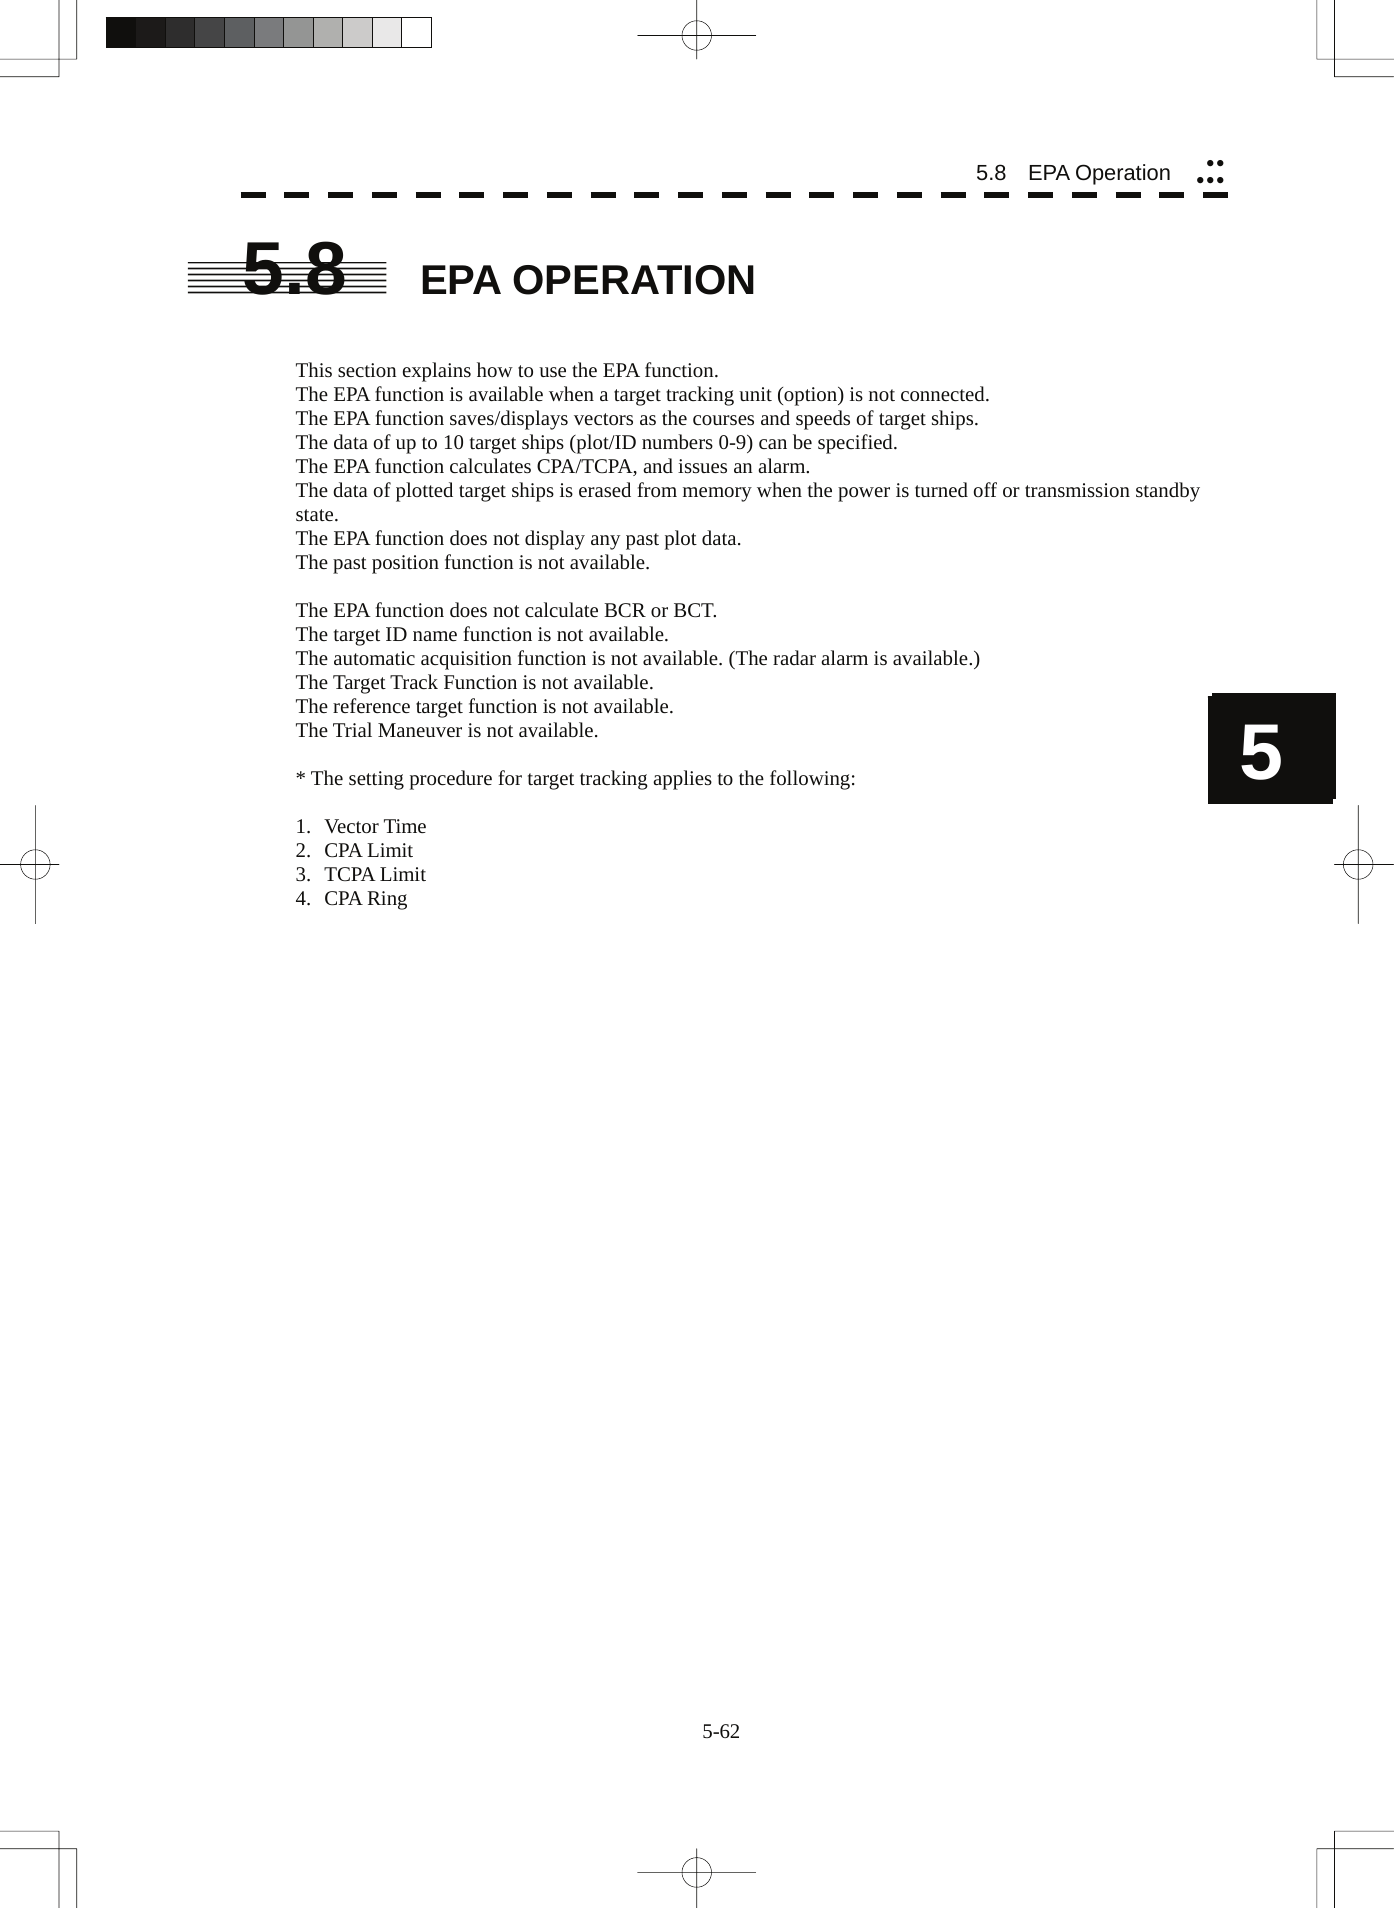  5-62 5 55.8   EPA Operation yyyyy5.8  EPA OPERATION   This section explains how to use the EPA function. The EPA function is available when a target tracking unit (option) is not connected. The EPA function saves/displays vectors as the courses and speeds of target ships. The data of up to 10 target ships (plot/ID numbers 0-9) can be specified. The EPA function calculates CPA/TCPA, and issues an alarm. The data of plotted target ships is erased from memory when the power is turned off or transmission standby state. The EPA function does not display any past plot data. The past position function is not available.  The EPA function does not calculate BCR or BCT. The target ID name function is not available. The automatic acquisition function is not available. (The radar alarm is available.) The Target Track Function is not available. The reference target function is not available. The Trial Maneuver is not available.  * The setting procedure for target tracking applies to the following:  1. Vector Time 2. CPA Limit 3. TCPA Limit 4. CPA Ring    